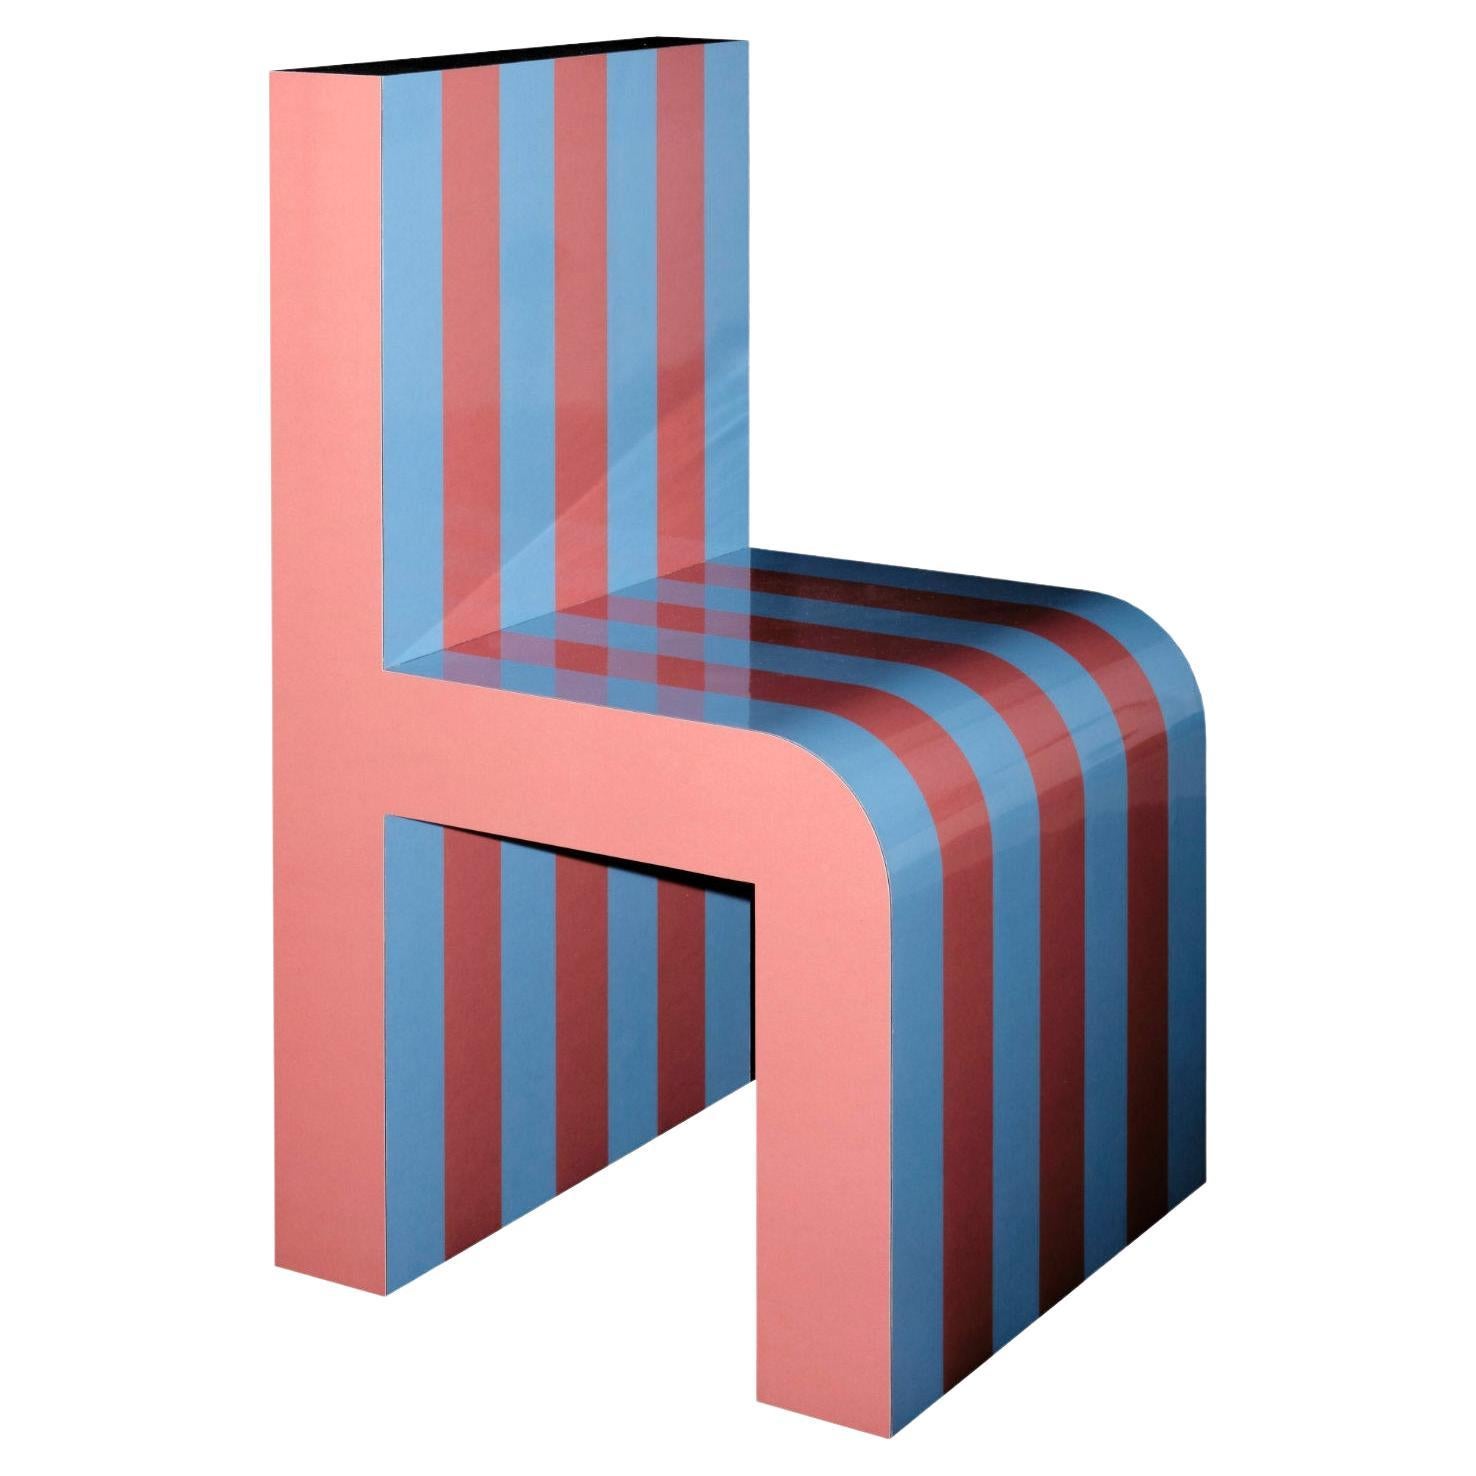 Arthur Arbesser Pemo Chair No. 9 - Rust/Pigeon Blue For Sale